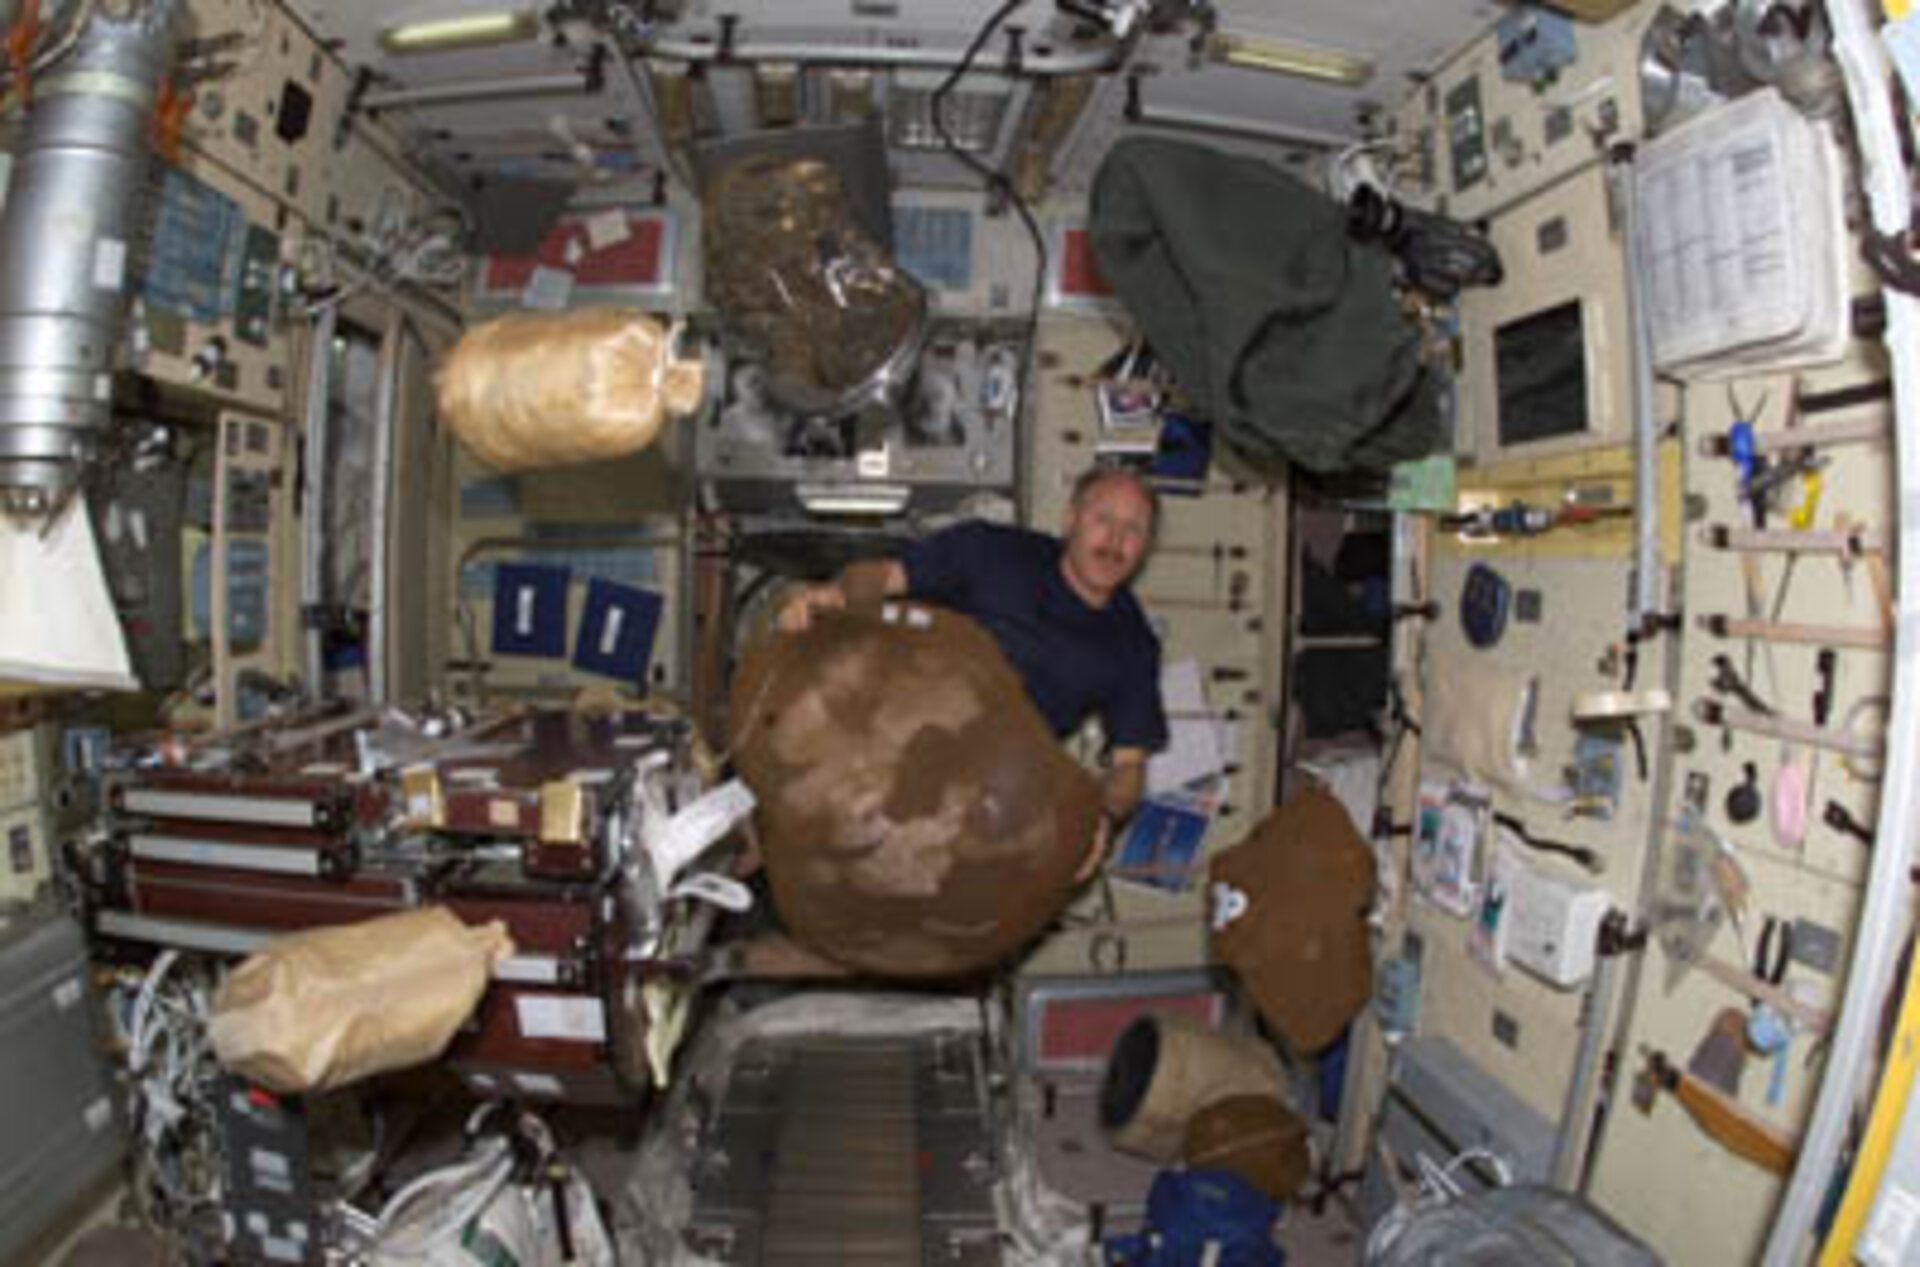 Astronaut Bowersox moves bagged items on ISS